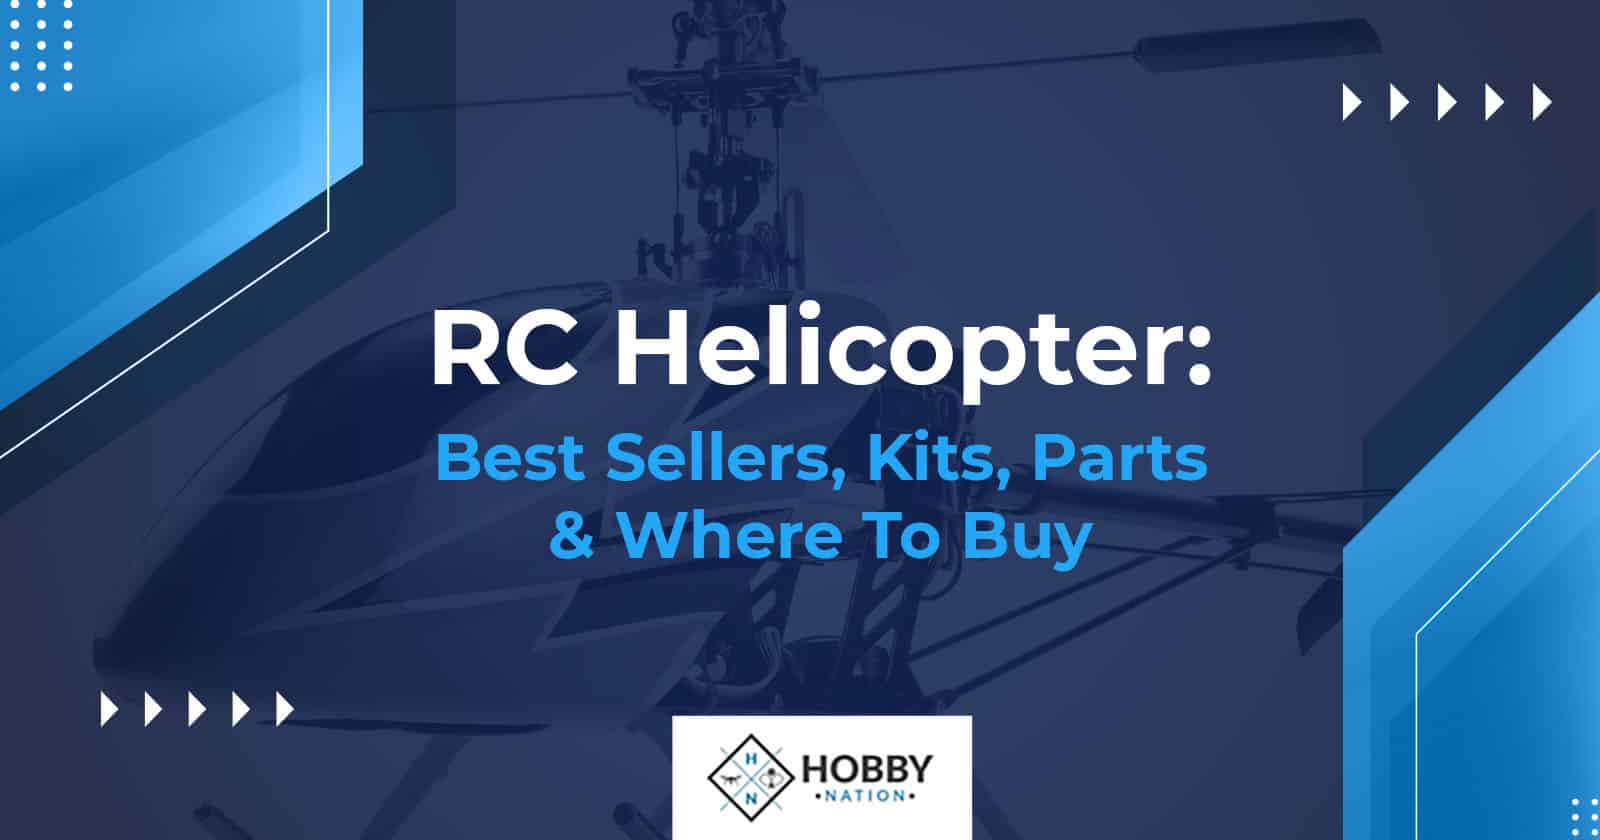 RC Helicopter: Best Sellers, Kits, Parts & Where To Buy